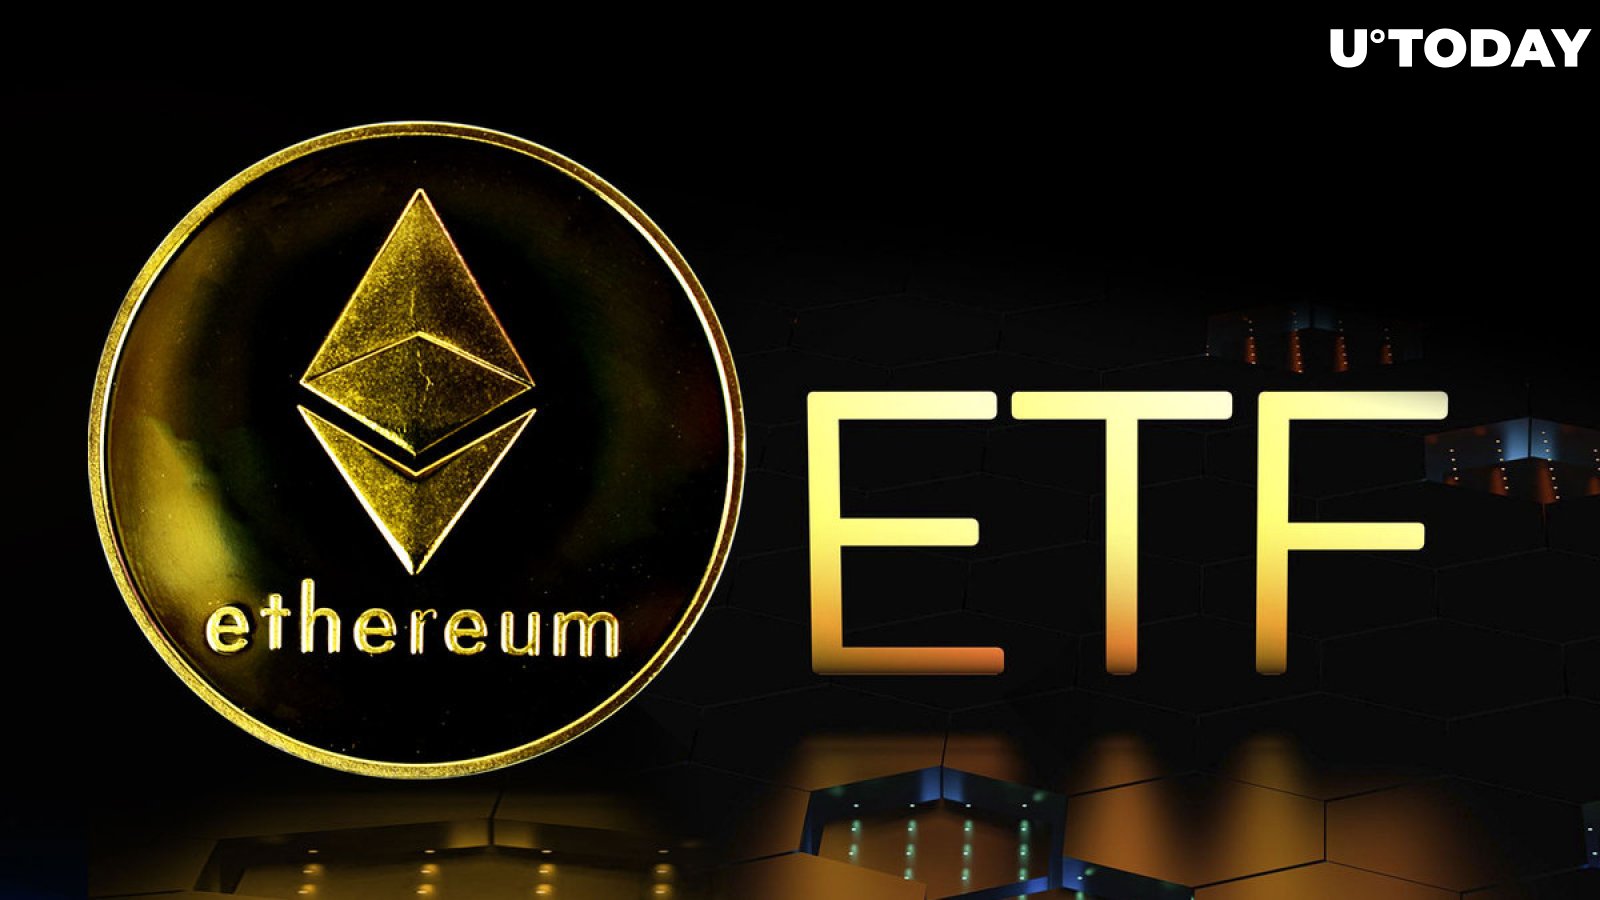 Ethereum ETF in March? Bloomberg Expert Thinks Not